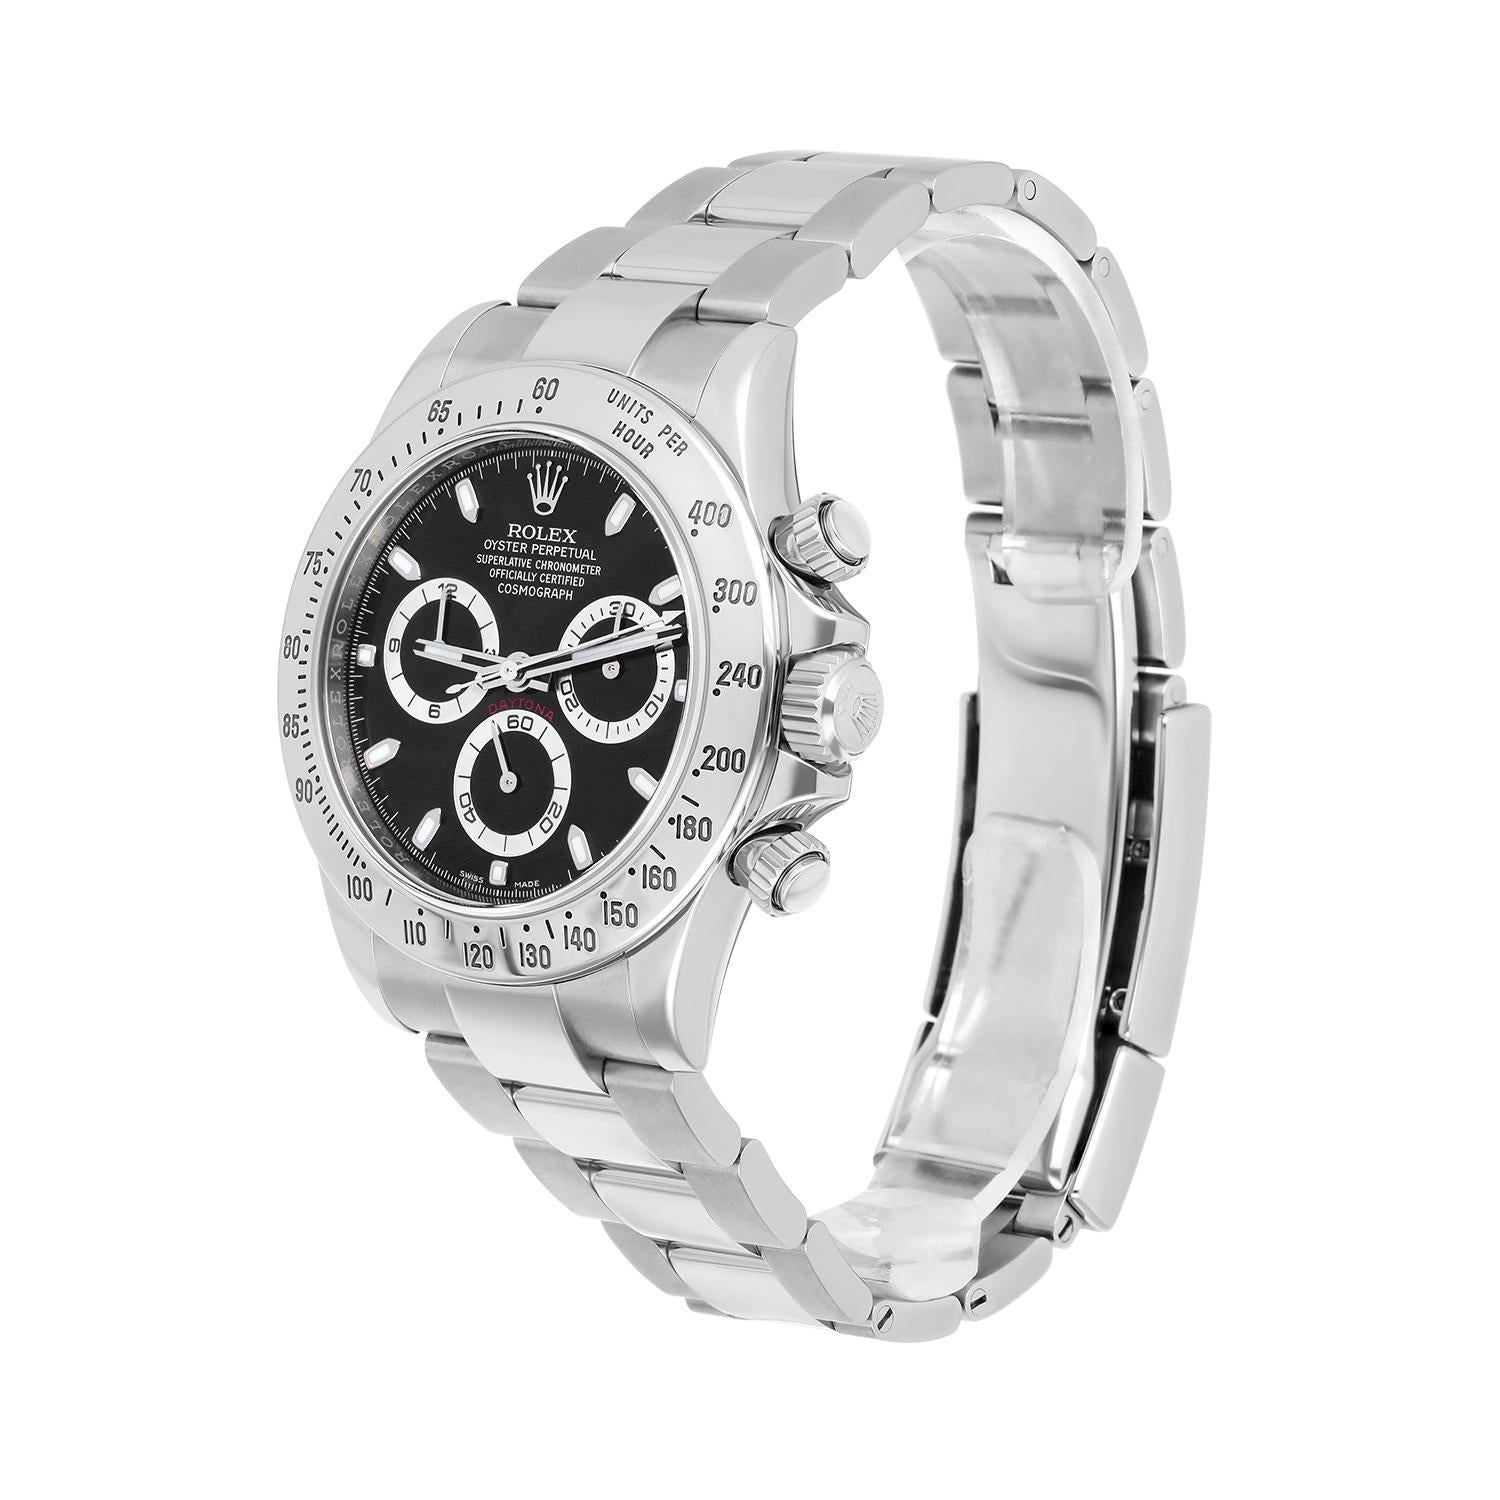 Rolex Cosmograph Daytona Stainless Steel 40mm Black Men's Watch 116520 For Sale 1